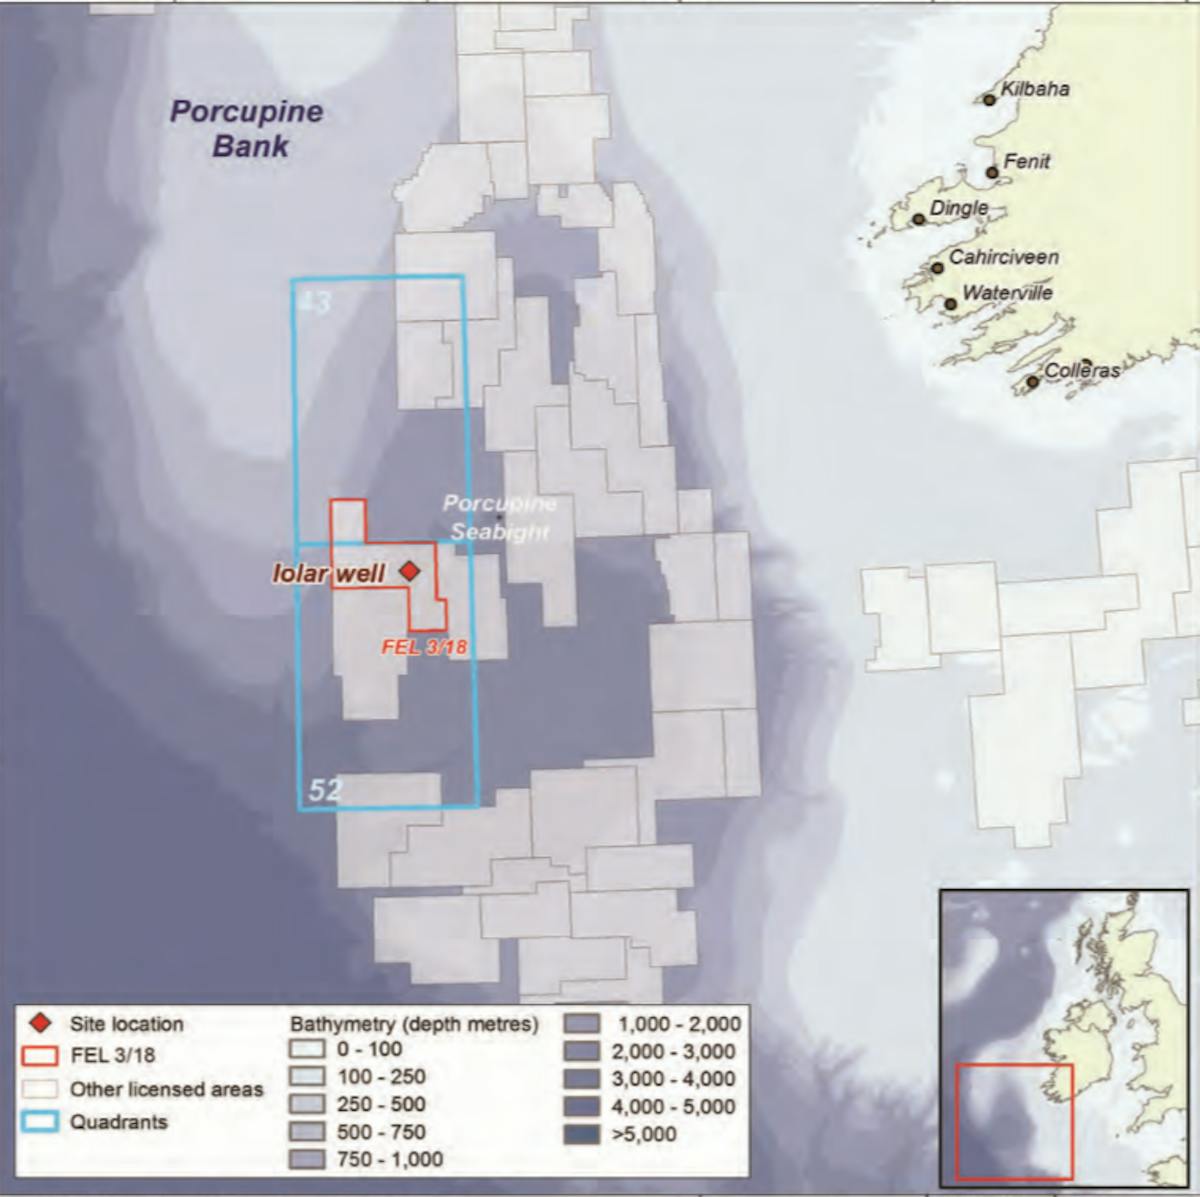 Iolar prospect in license FEL 3/18 in the South Porcupine basin offshore western Ireland.